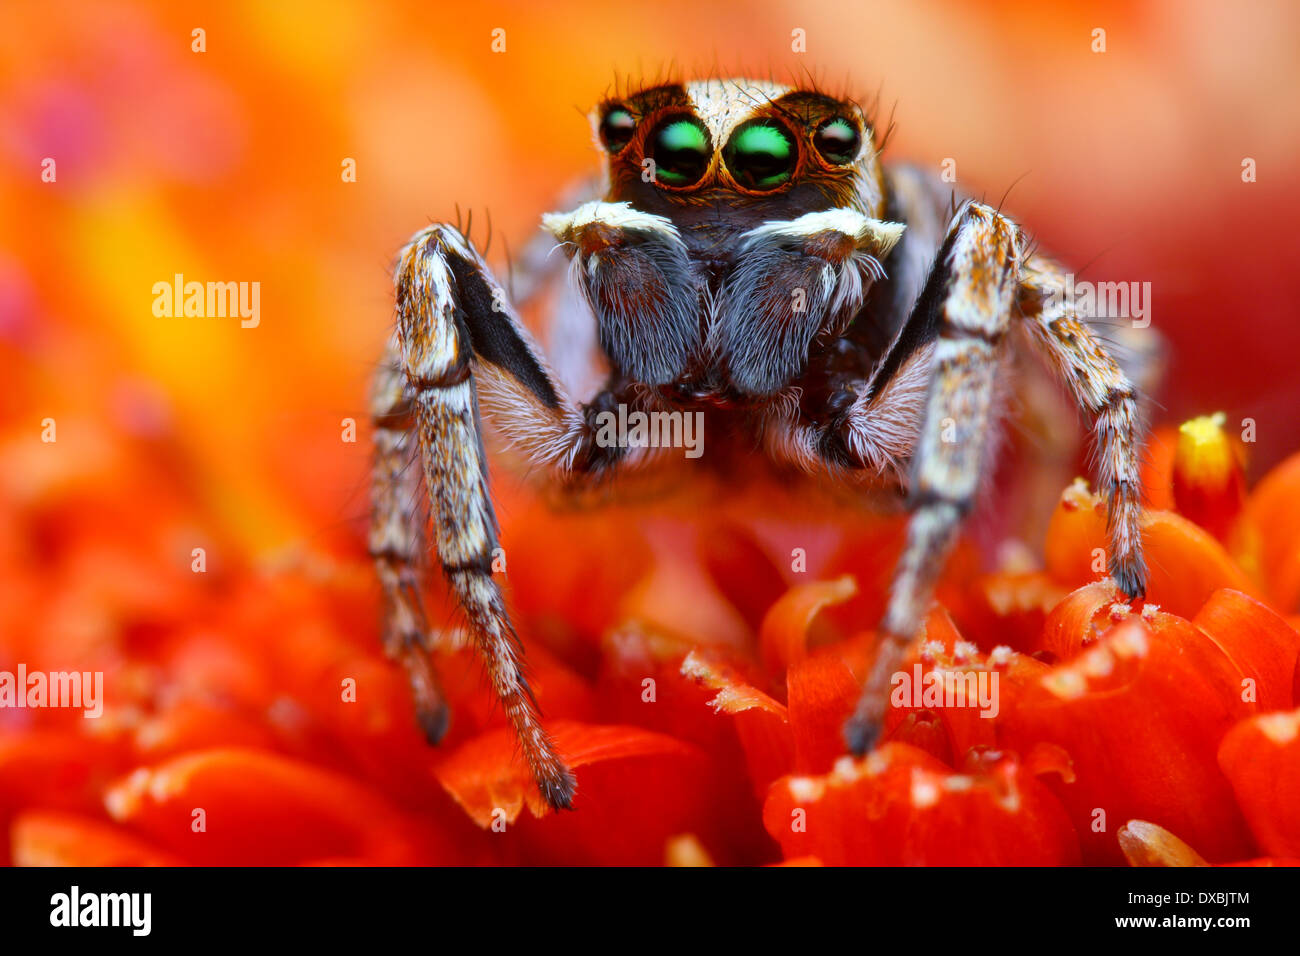 Turkish jumping spider close up with the orange flower background Stock Photo